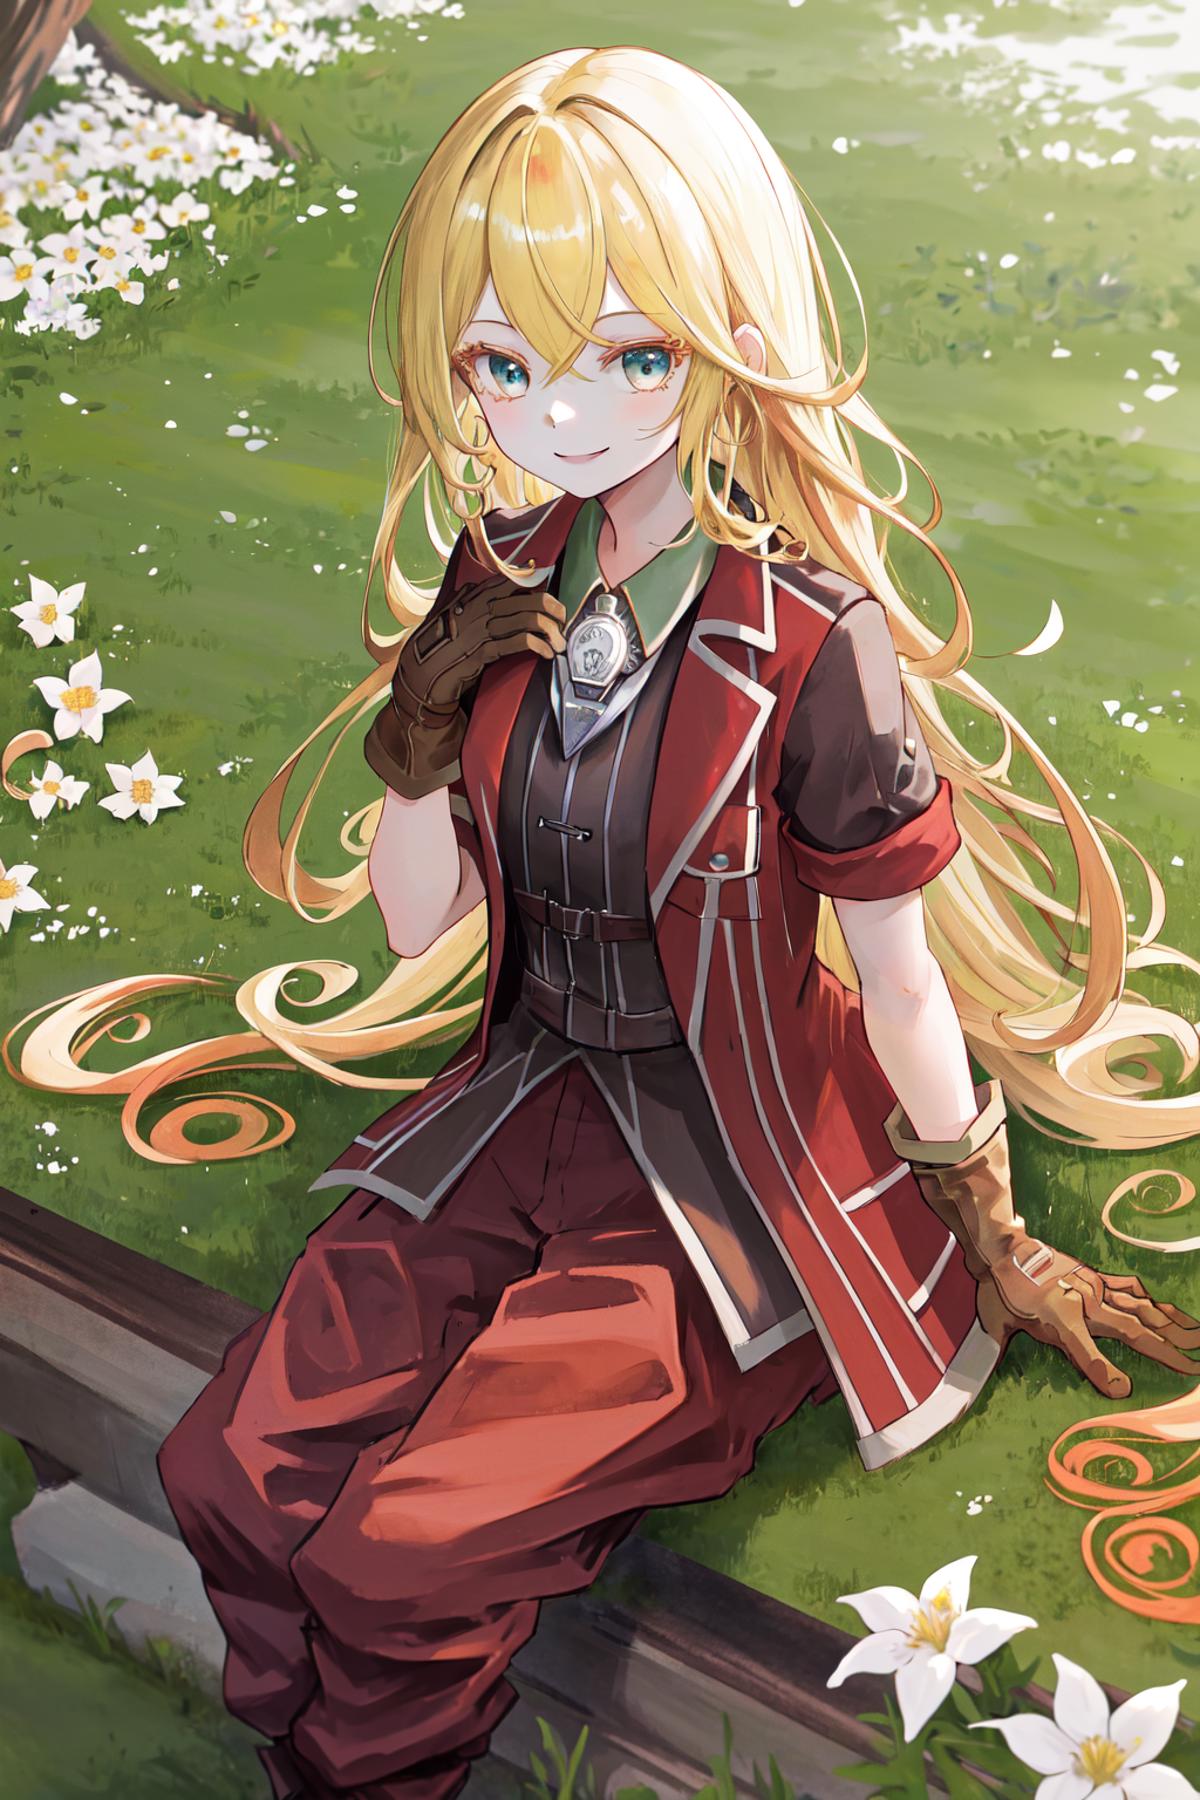 Lyza (Made in Abyss) | 来自深渊 莱莎 | メイドインアビス ライザ image by Akii